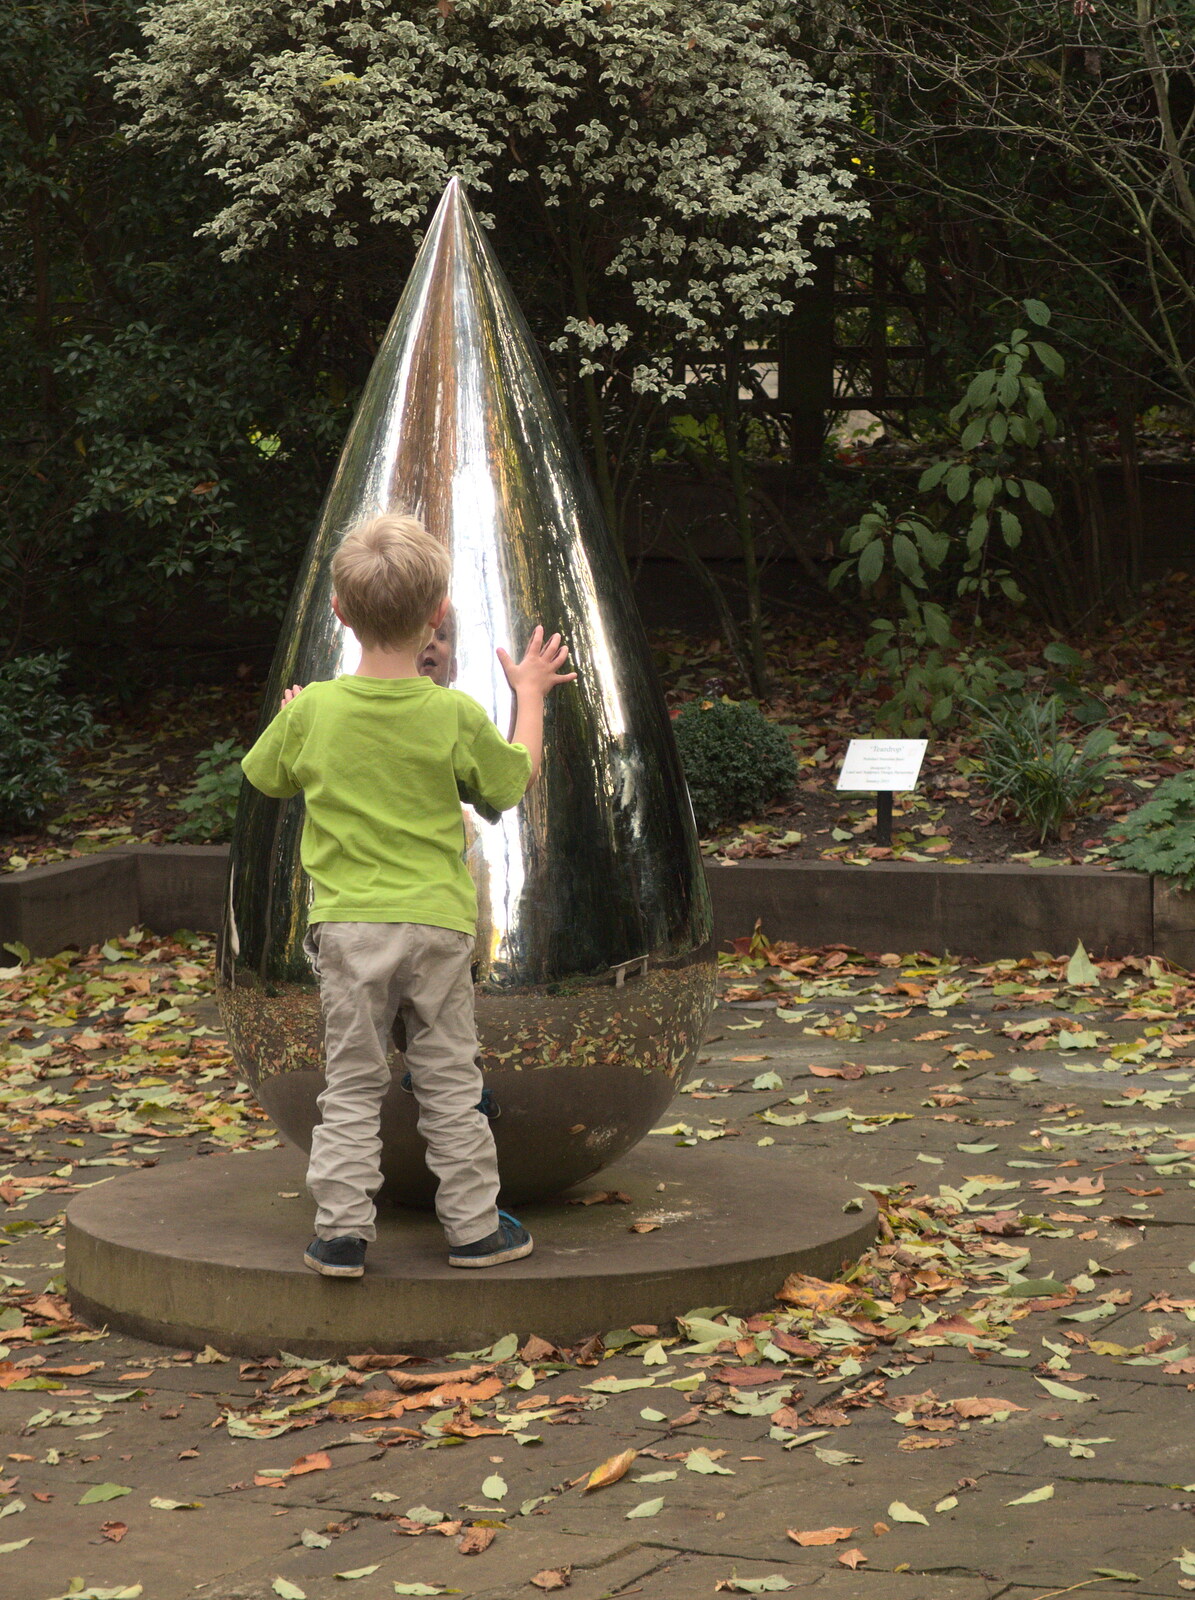 Harry with a steel teardrop from Abbey Gardens in Autumn, Bury St. Edmunds, Suffolk - 27th October 2015